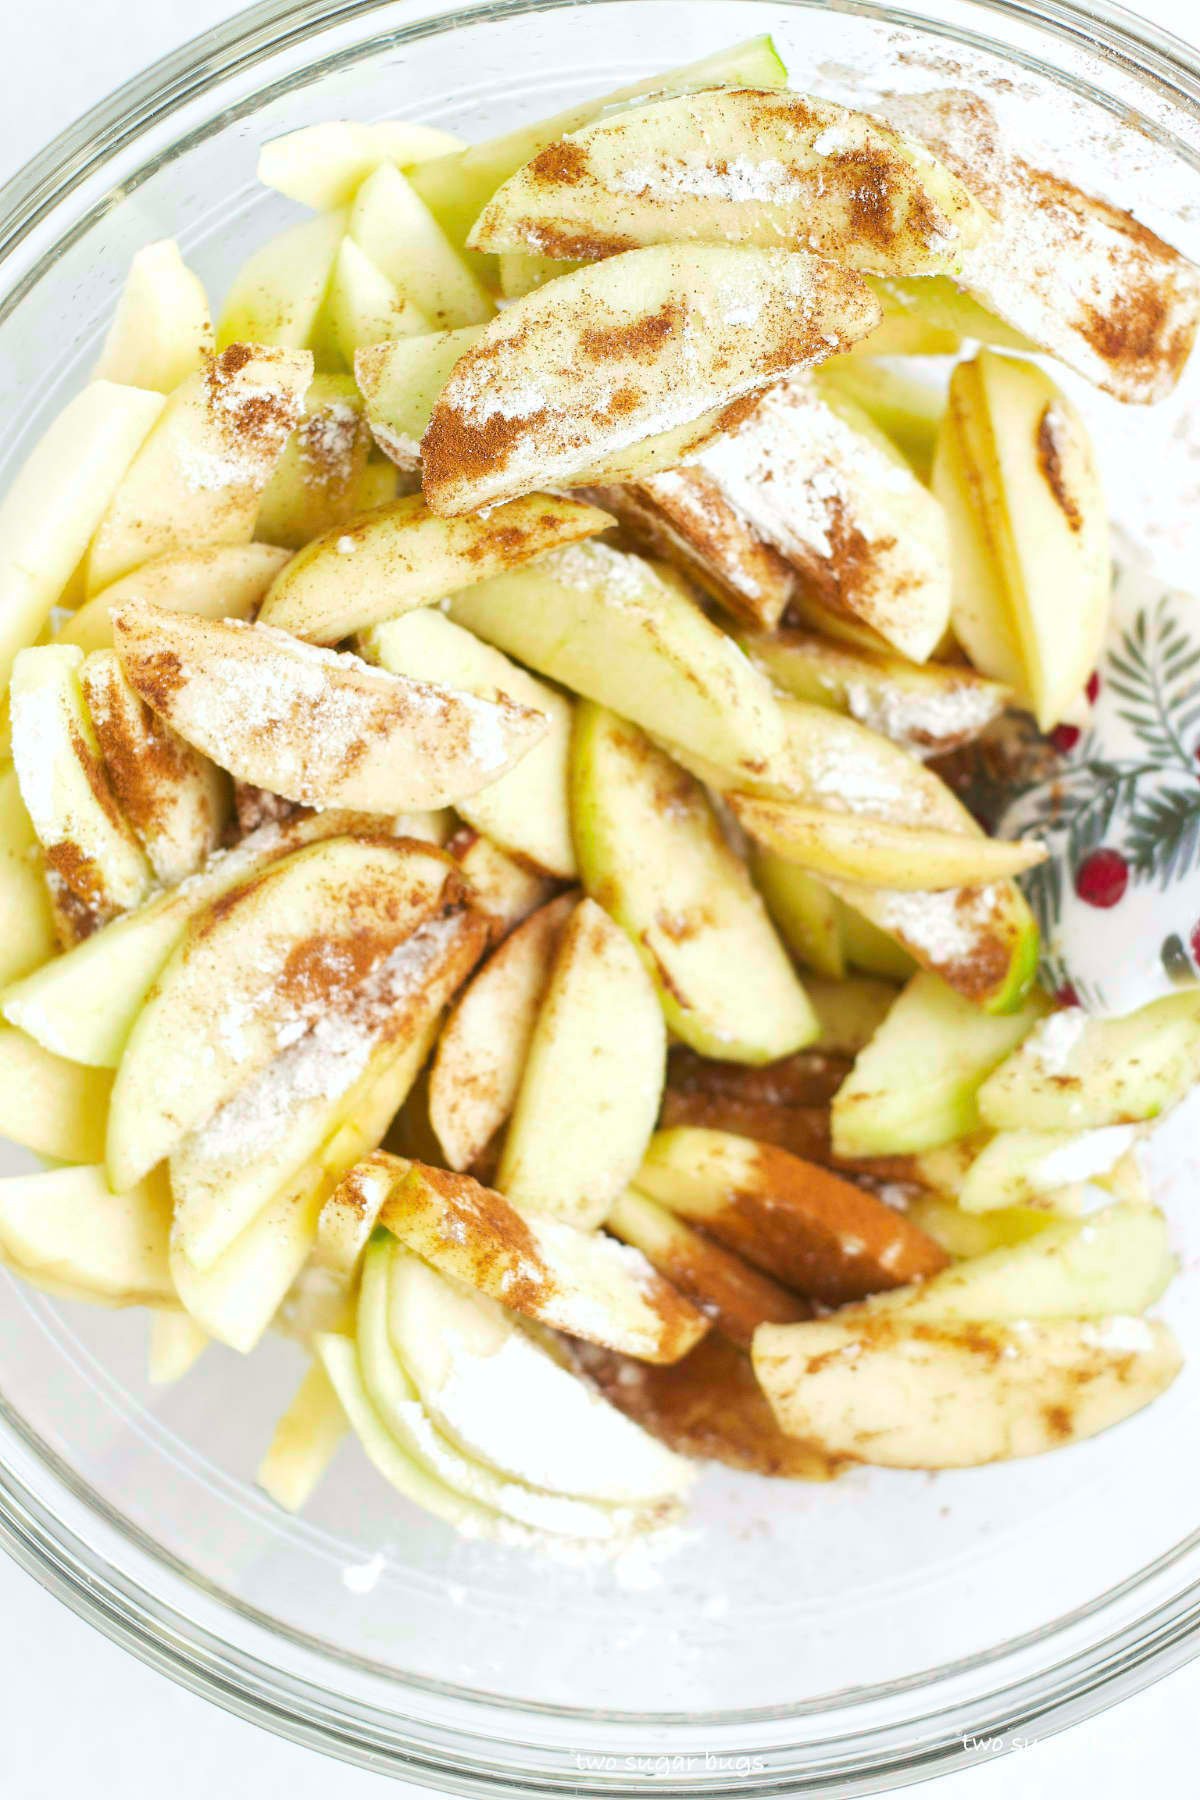 apples with flour, cinnamon and brown sugar in a bowl